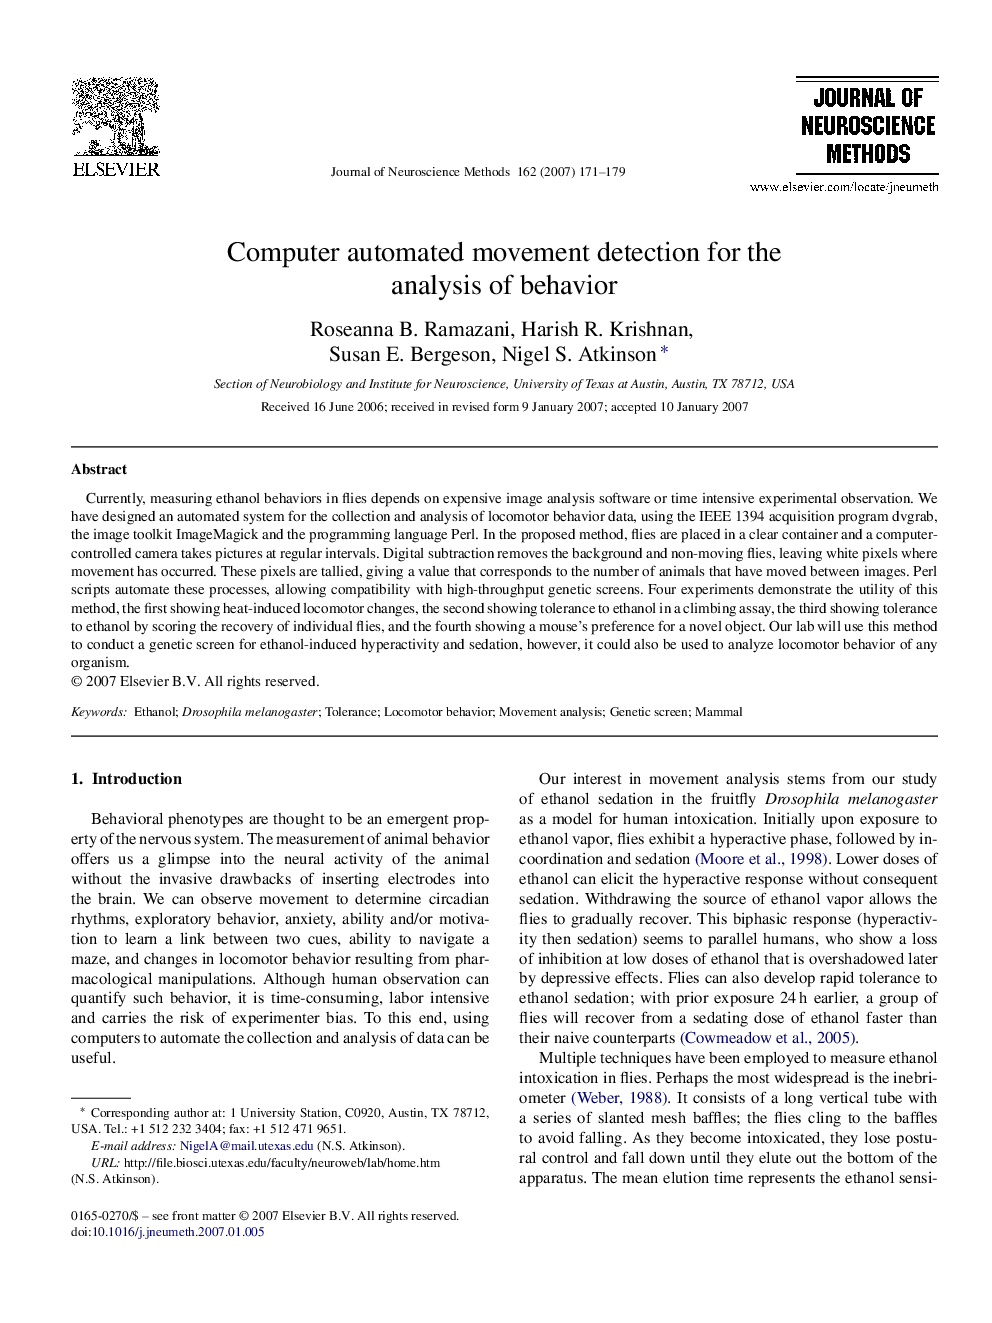 Computer automated movement detection for the analysis of behavior